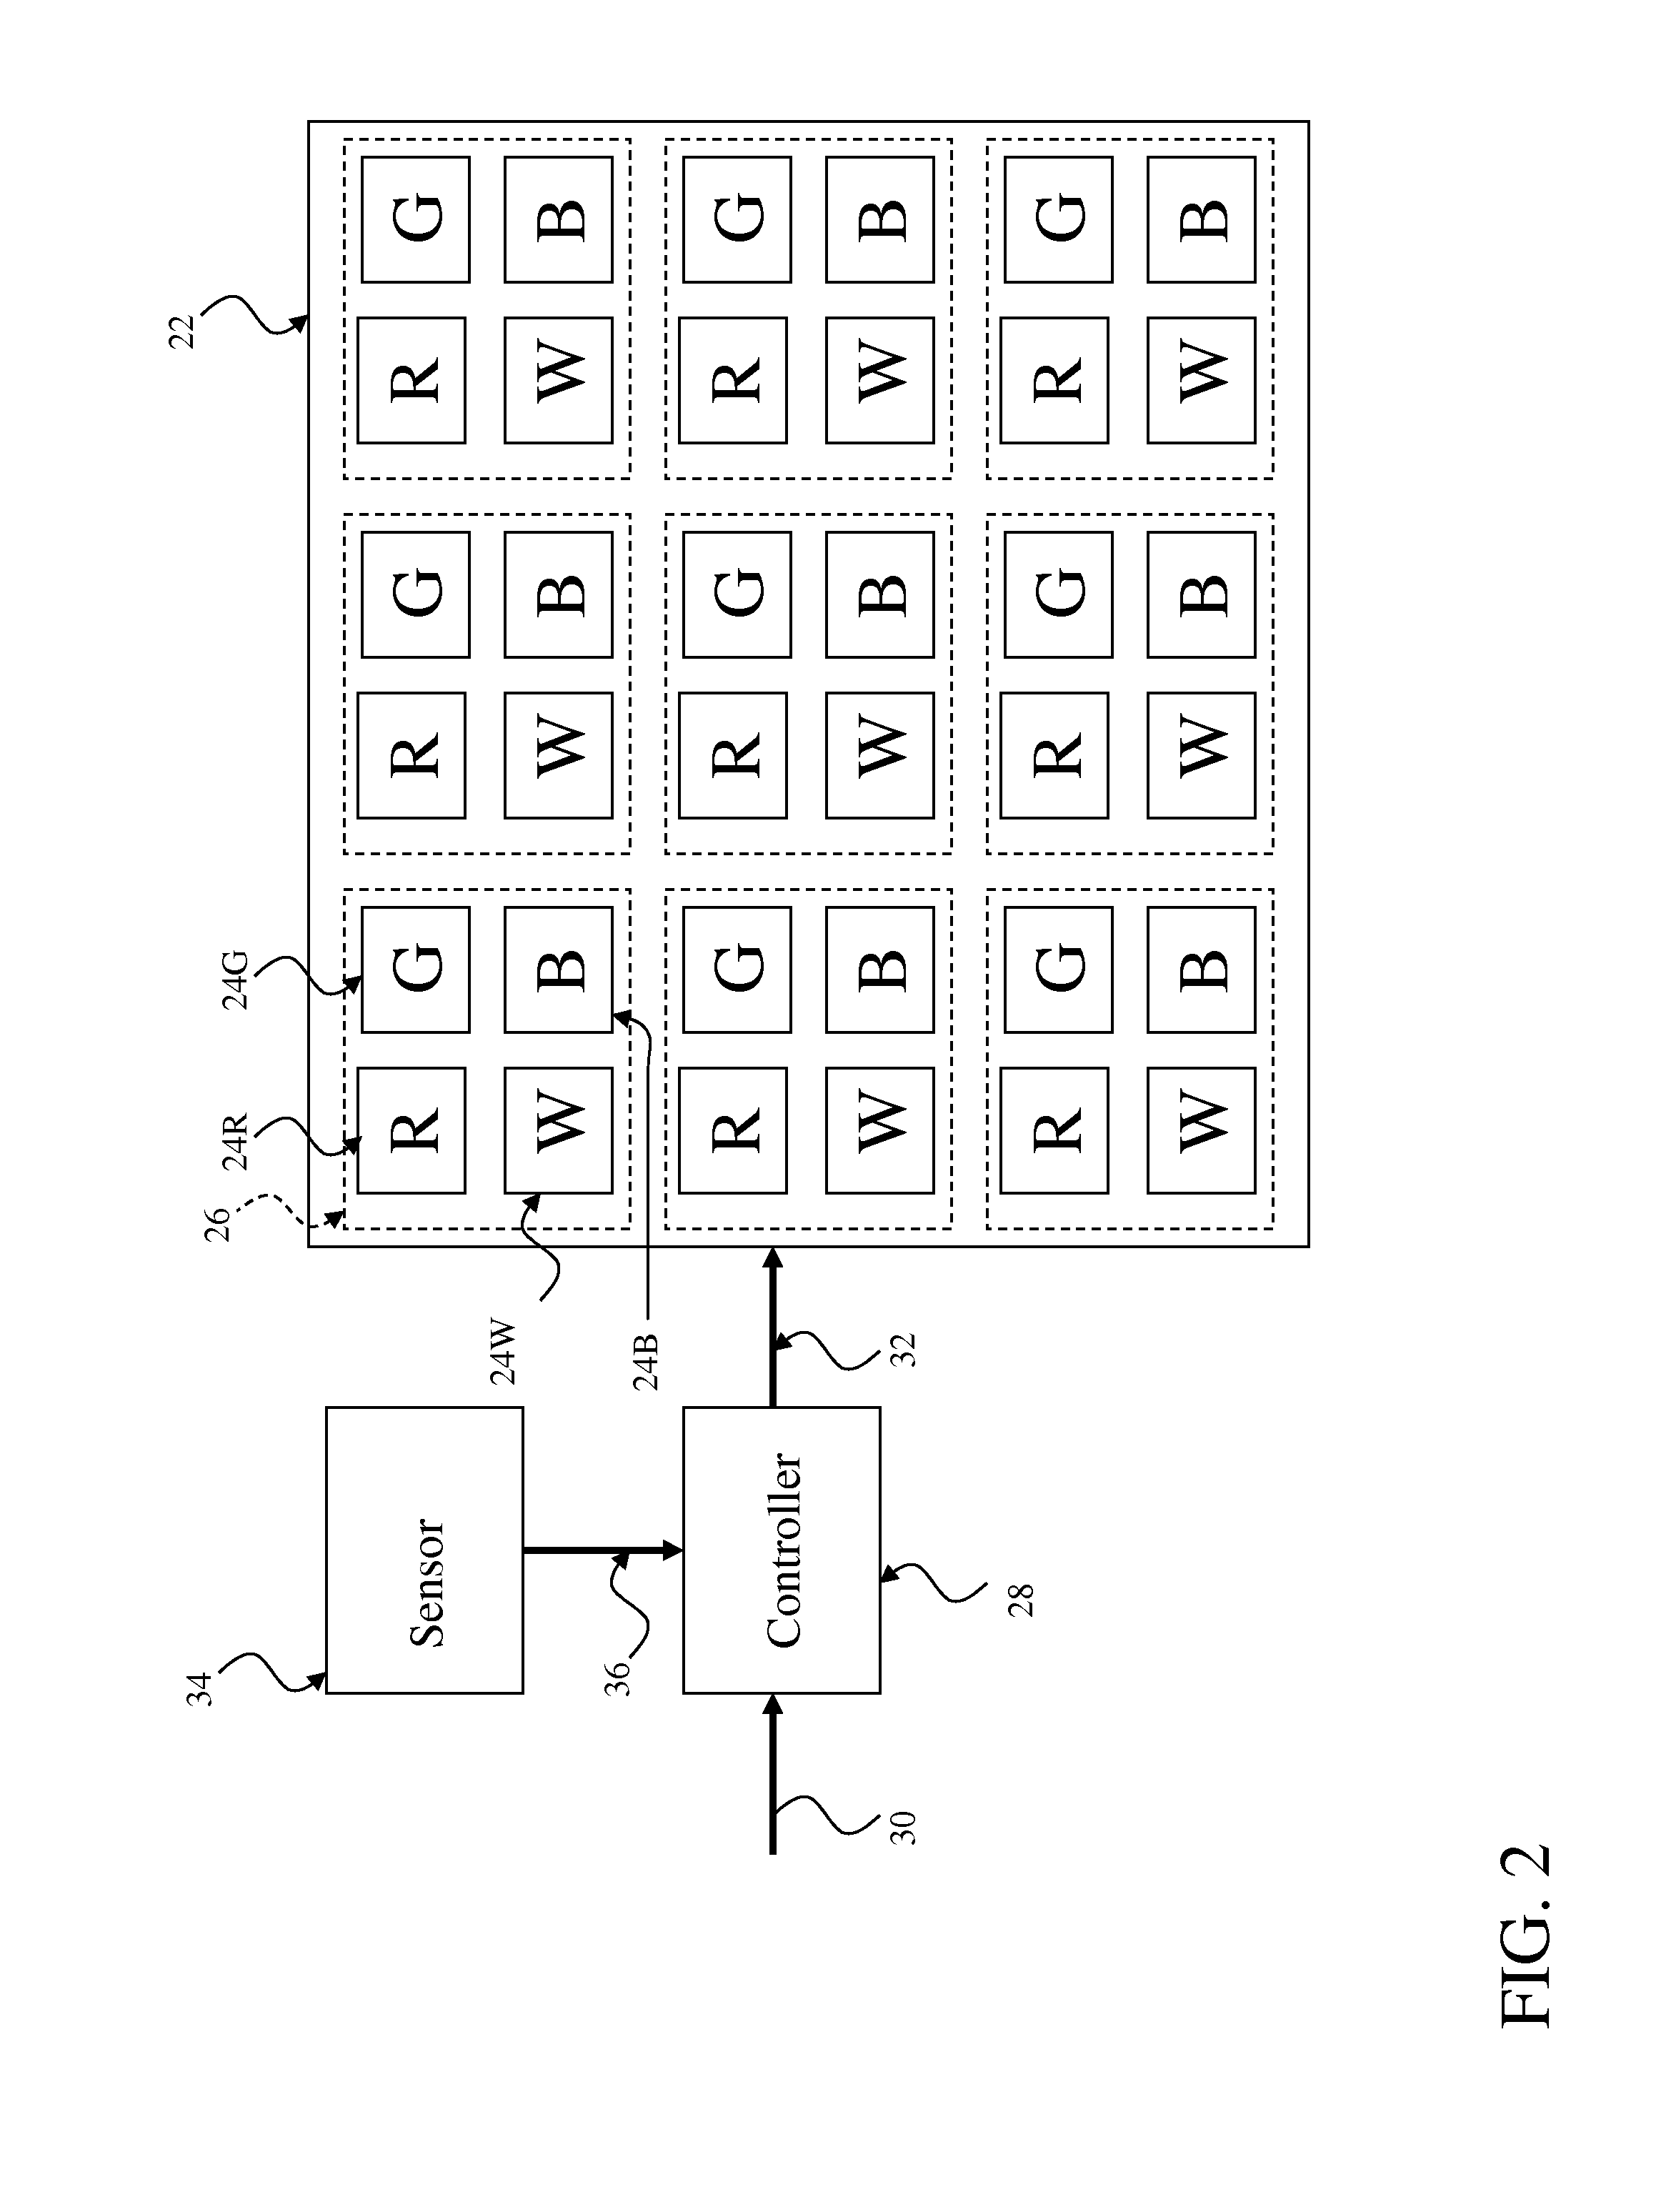 Four-channel display with desaturation and luminance gain